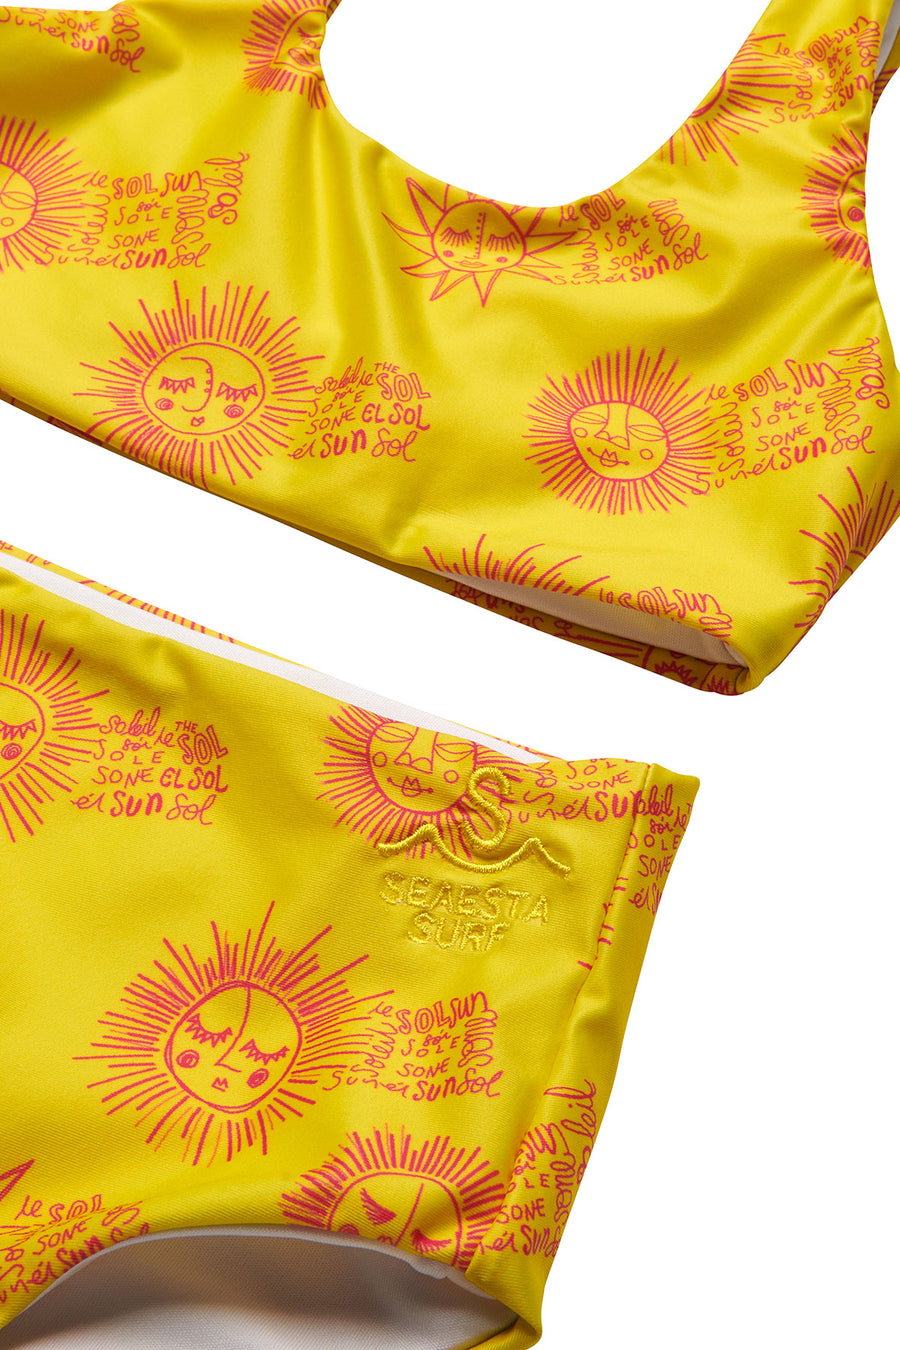 Soleil / Neon / Two Piece Swimsuit